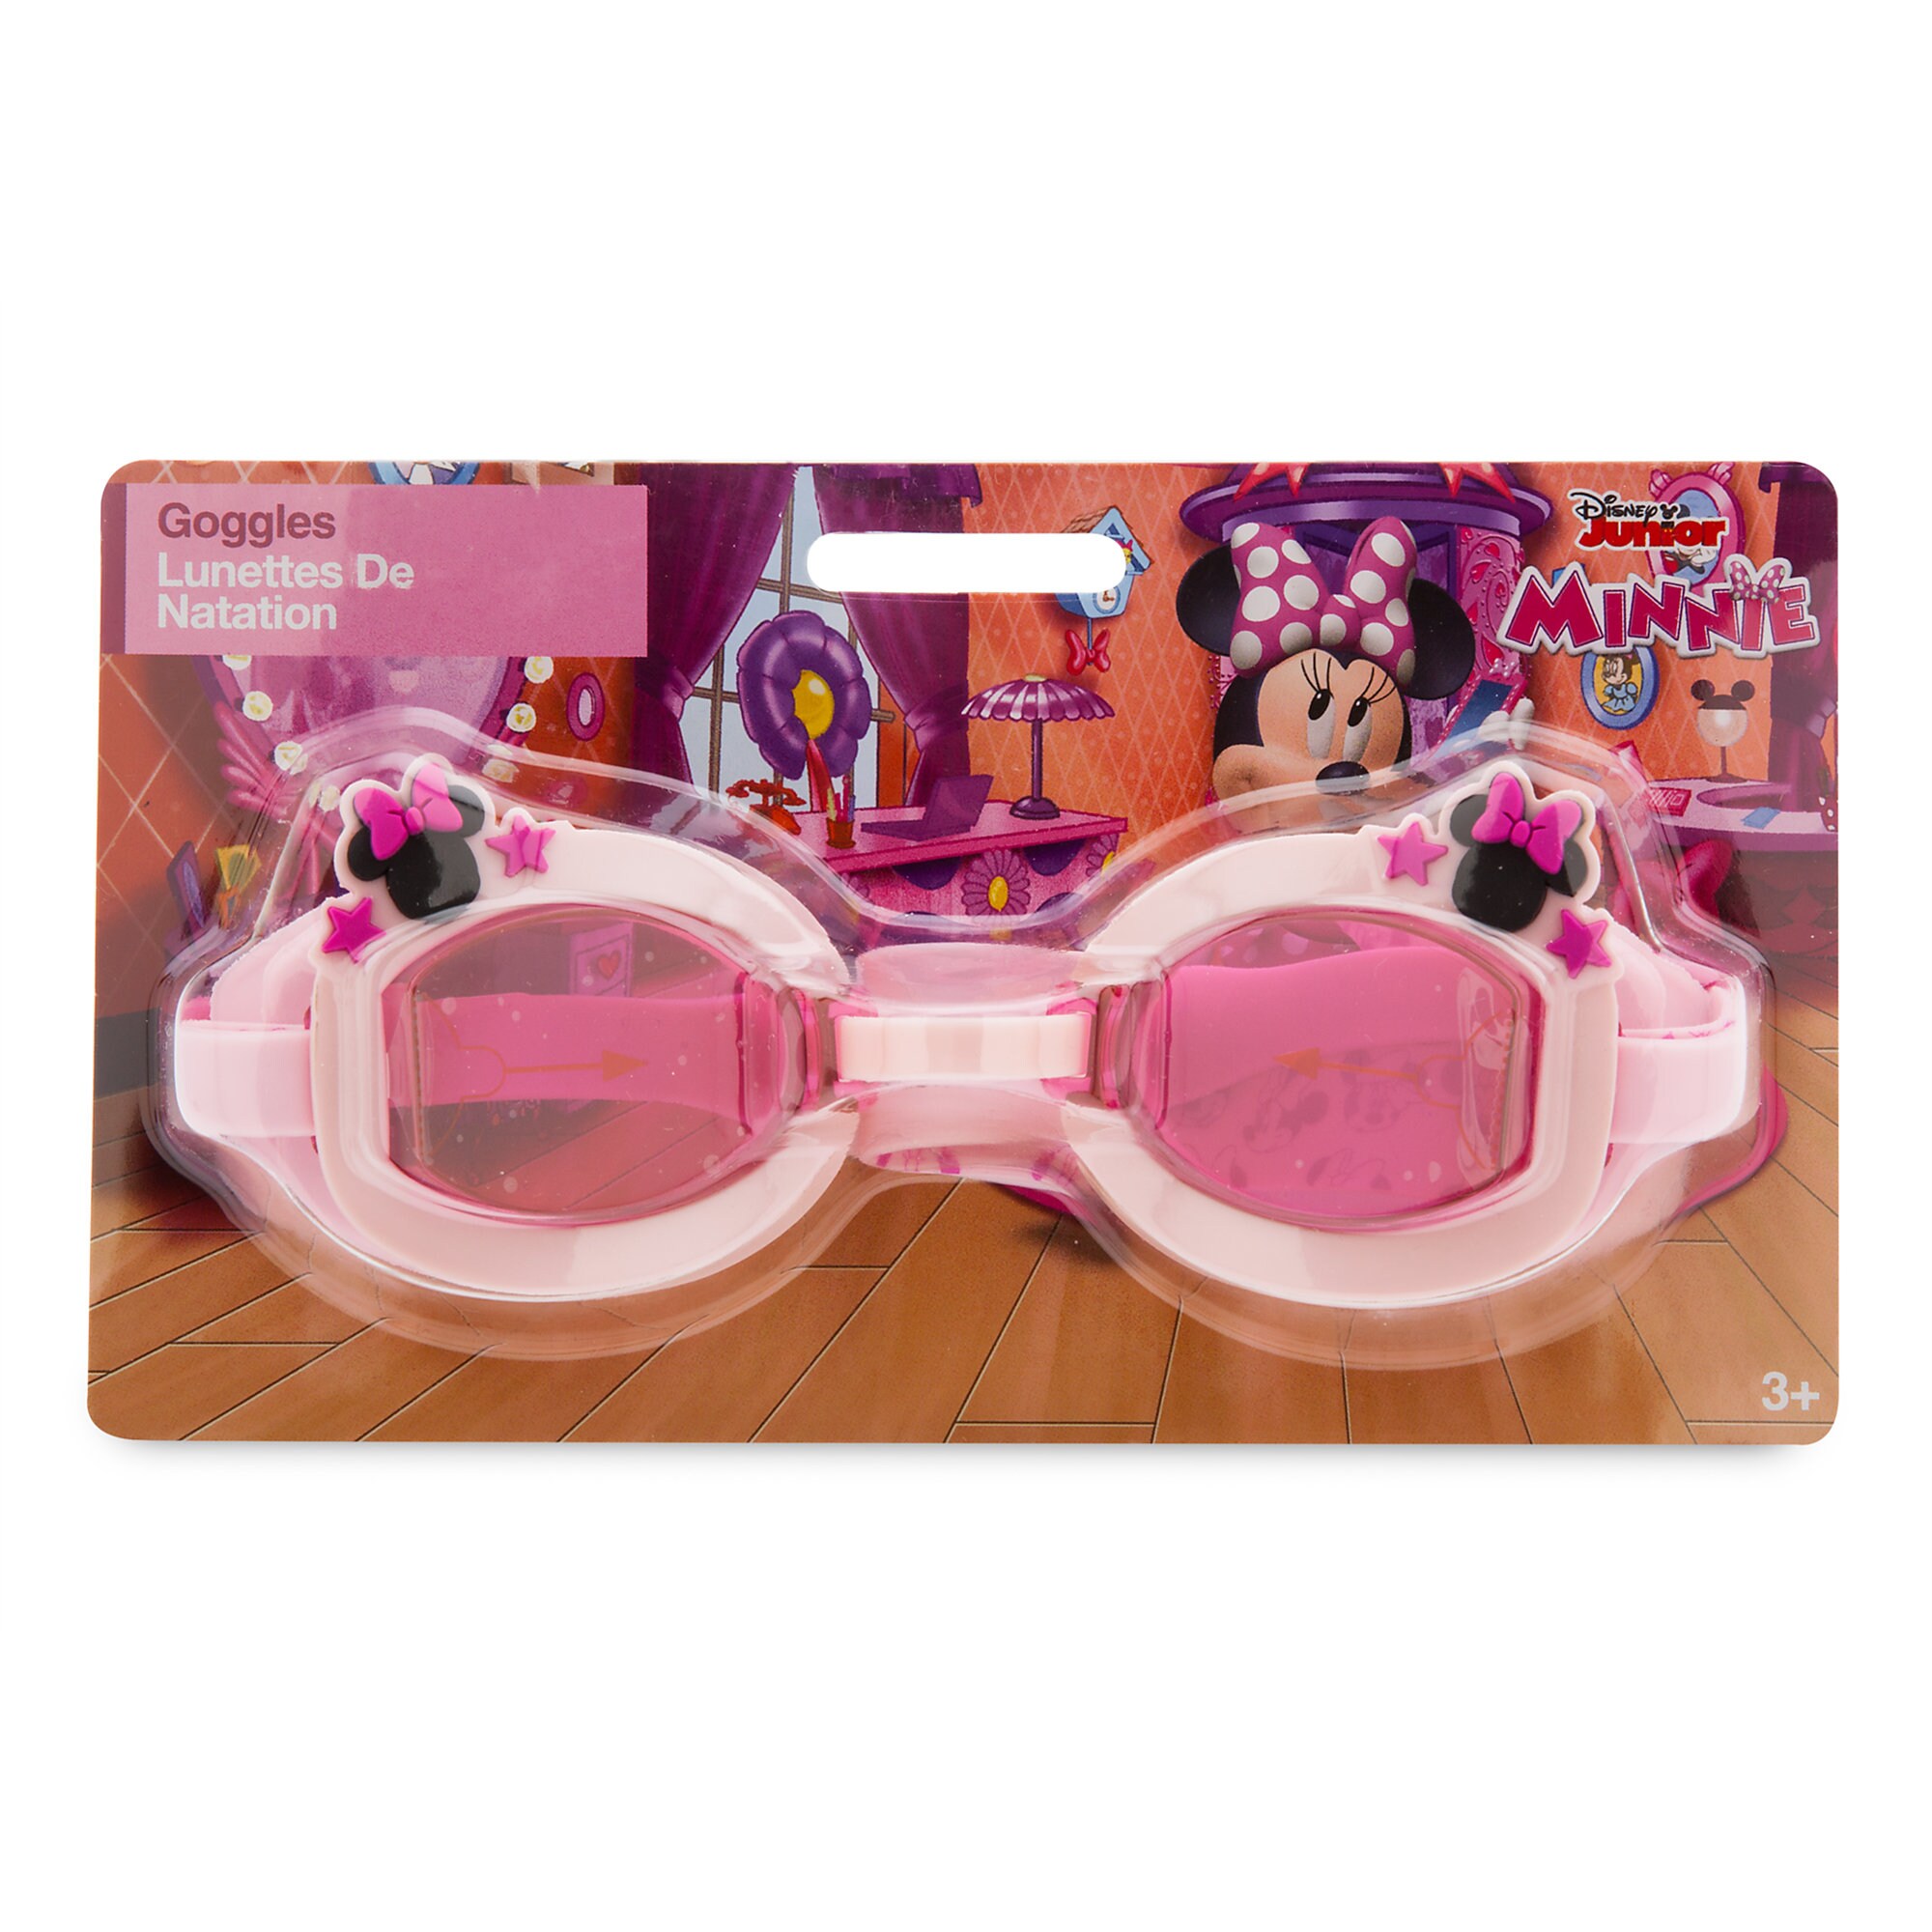 Minnie Mouse Swim Goggles for Kids